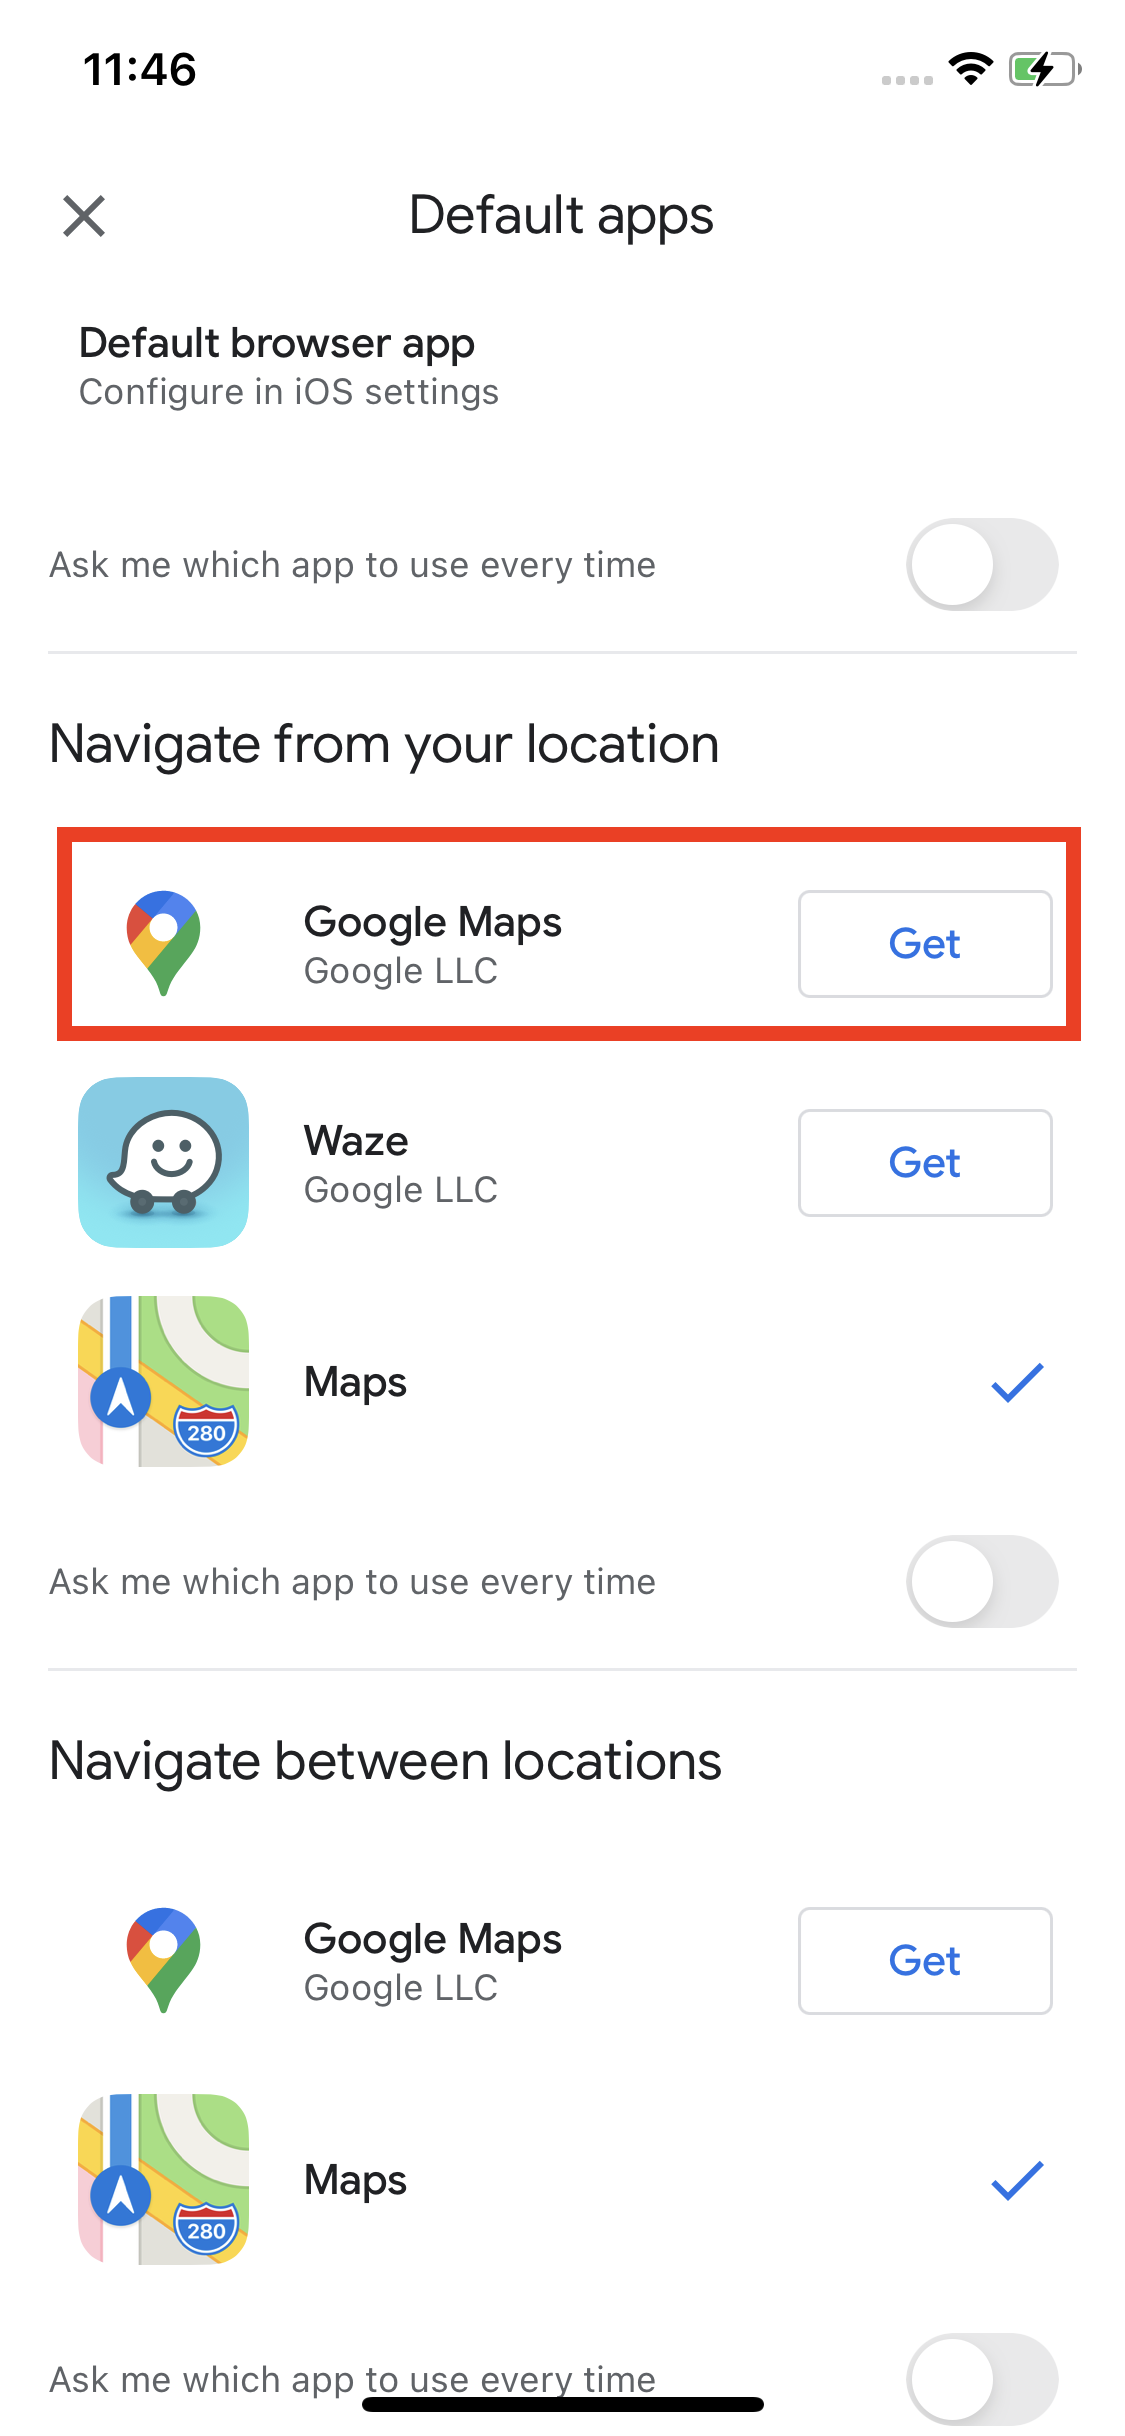 Under Navigate from your location, select ‘Google Maps’.